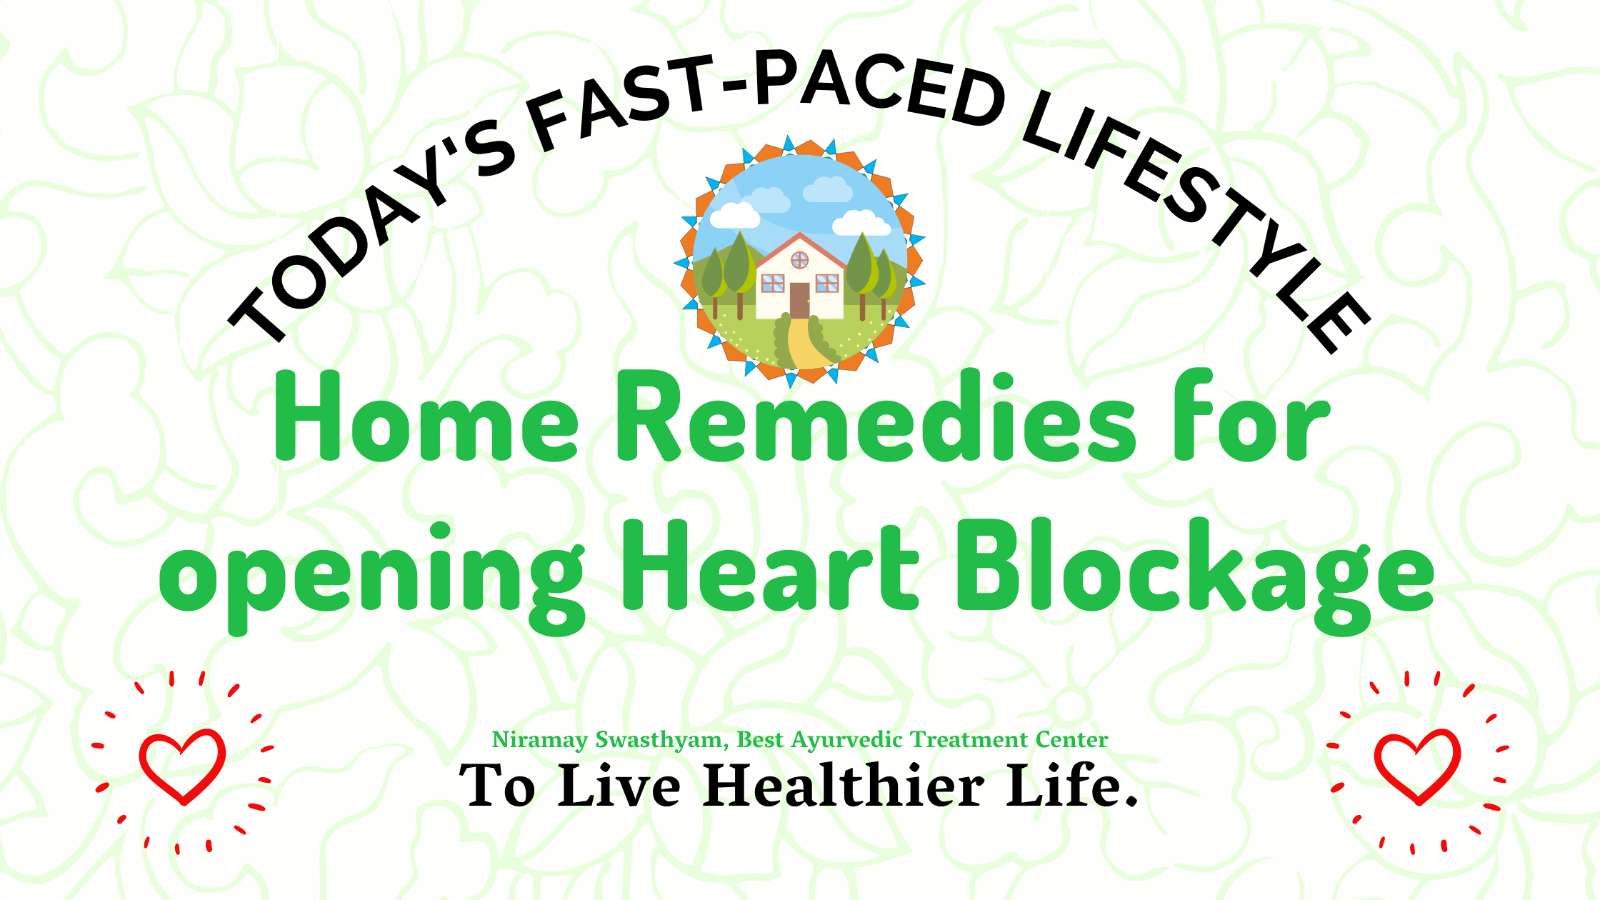 Home remedies for opening heart blockage in today's fast-paced lifestyle.